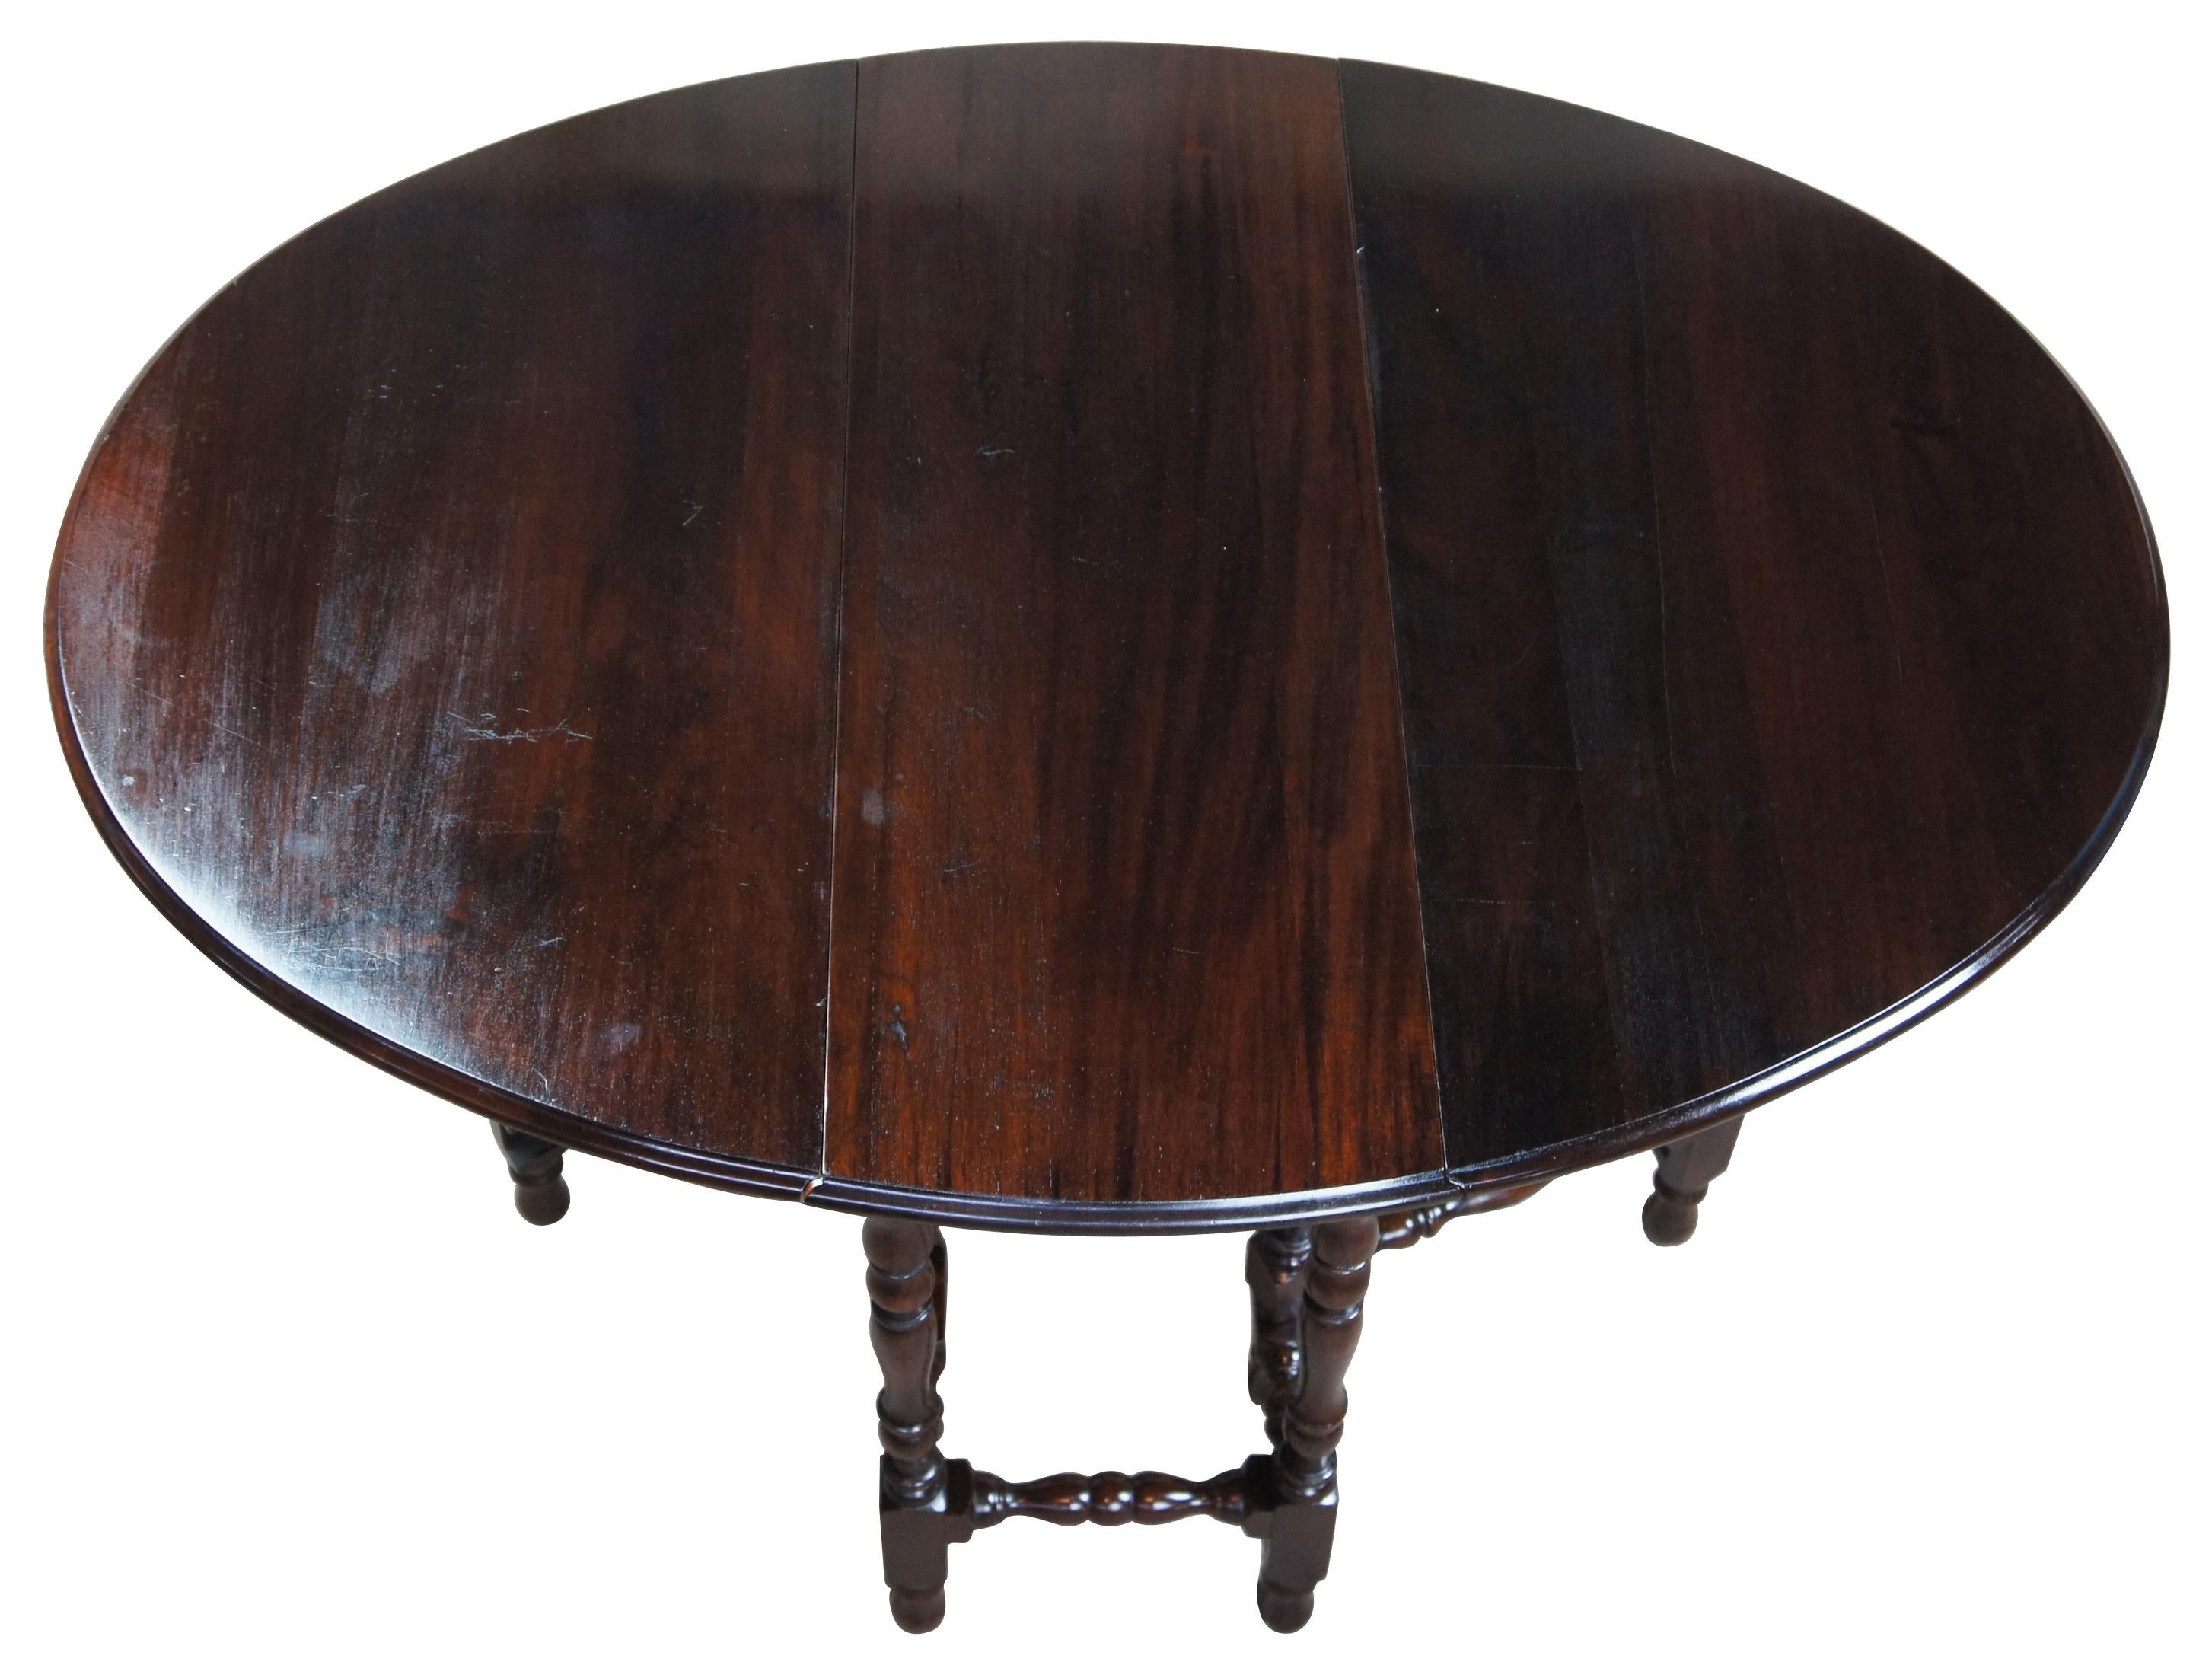 William and Mary Antique Early 20th Century William & Mary Walnut Drop Leaf Gateleg Accent Table